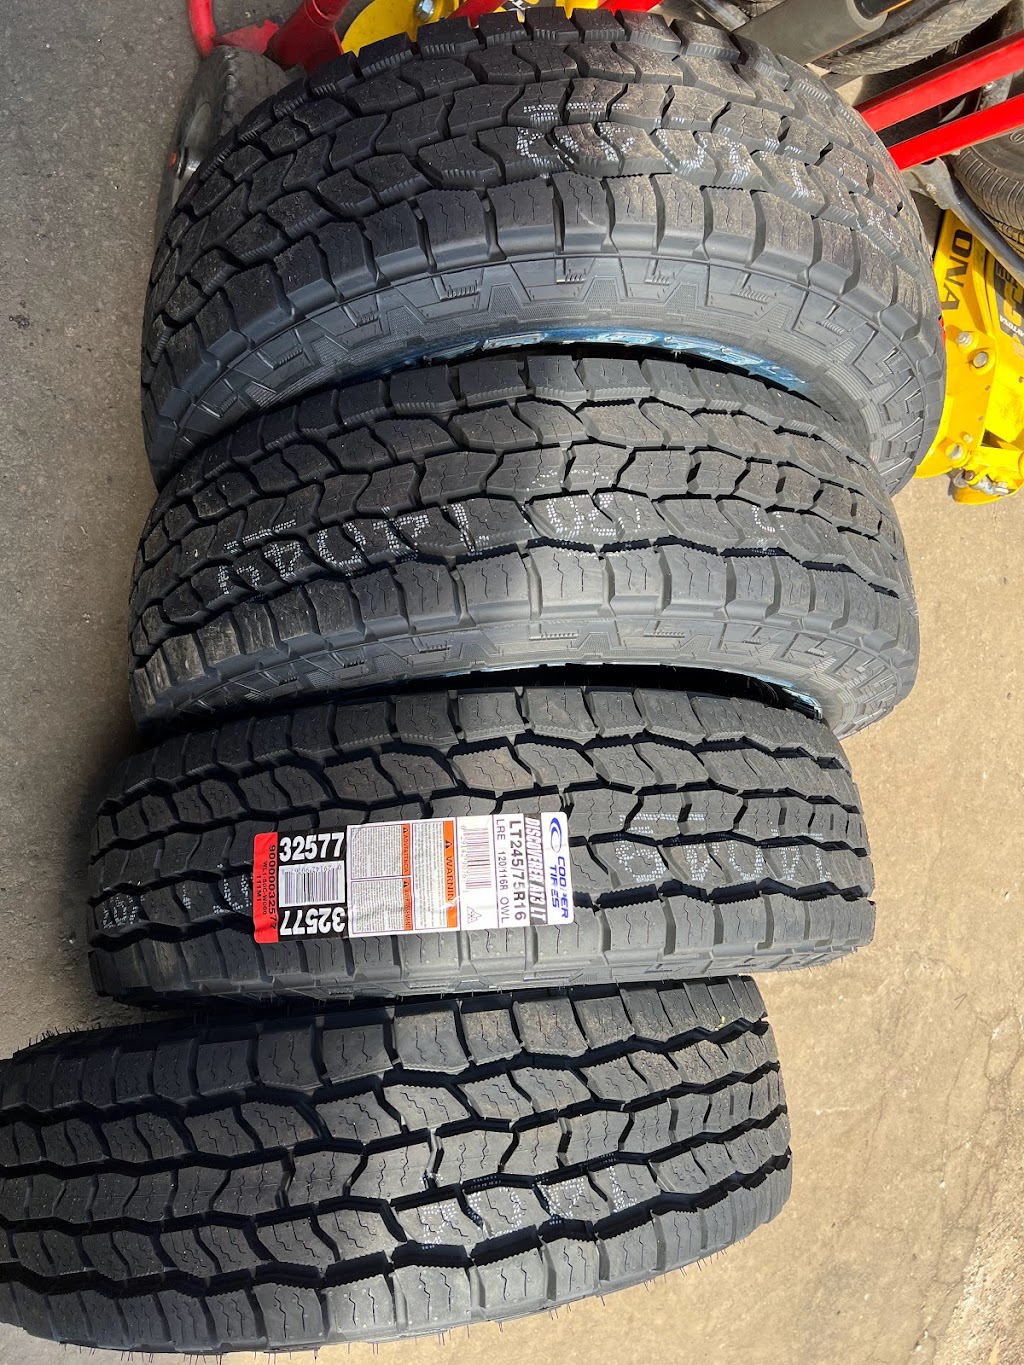 Quality tires llc | Edgemere Rd, New Haven, CT 06512 | Phone: (203) 887-6874